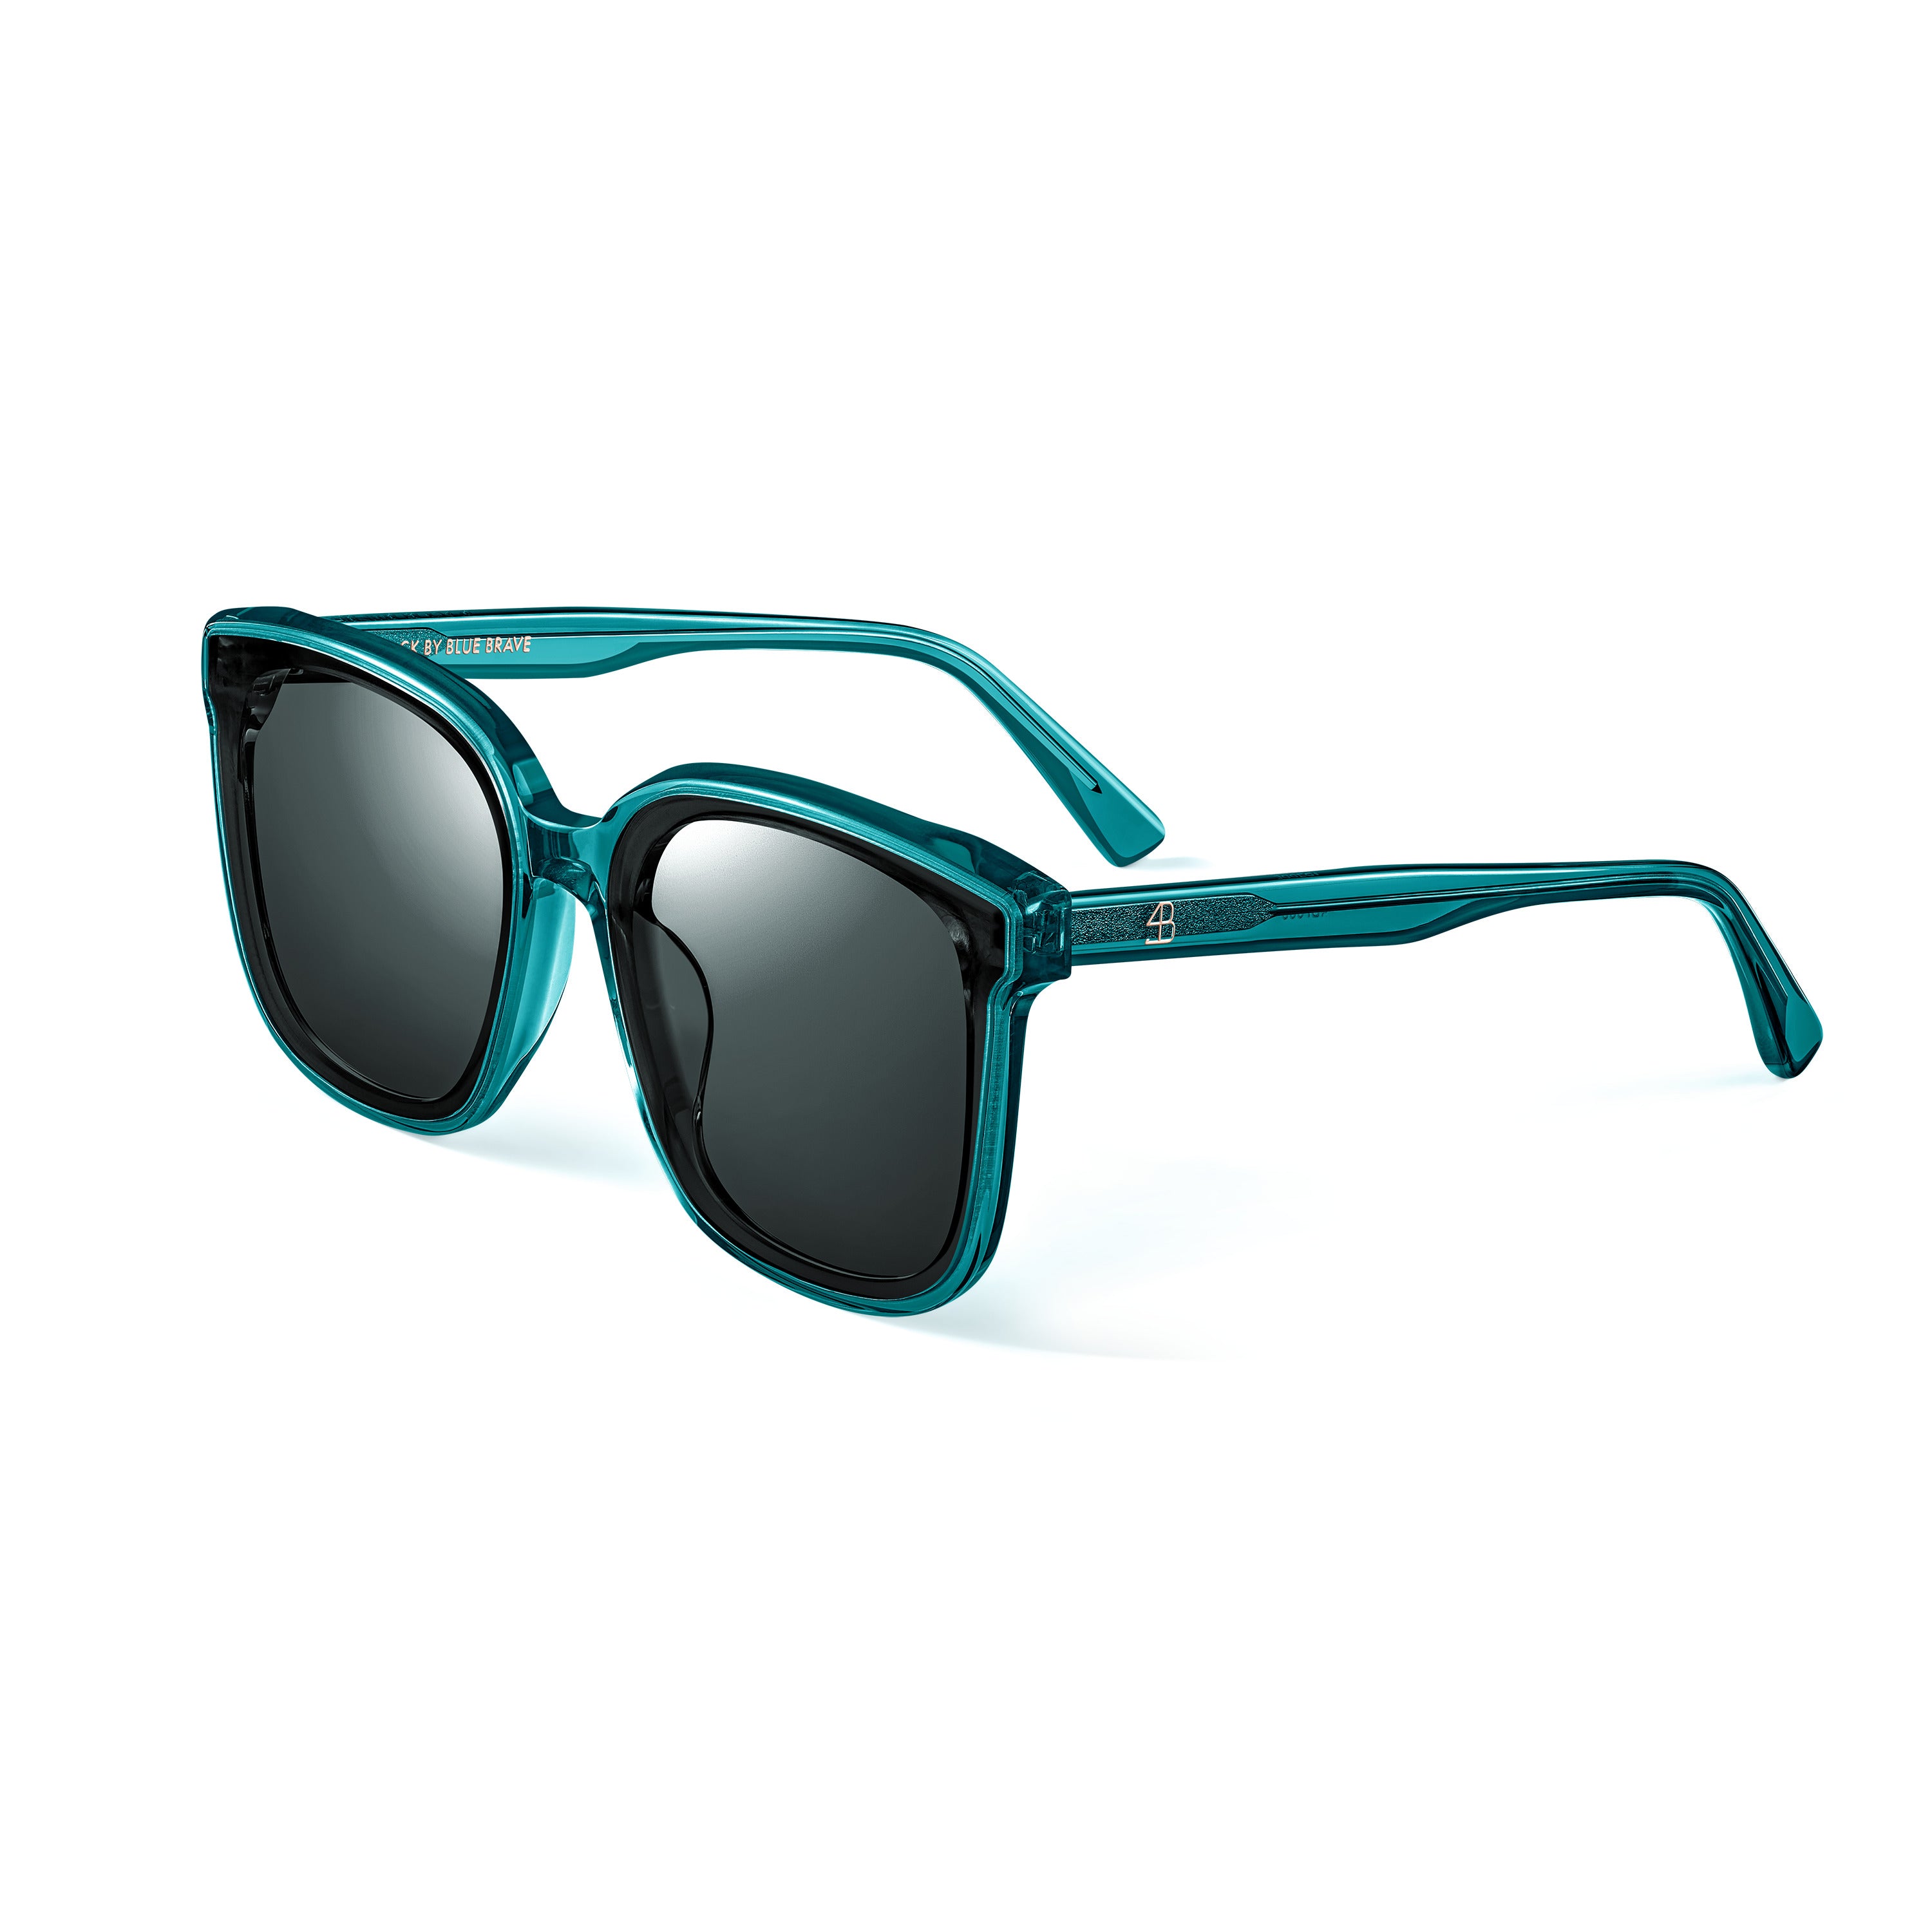 TURQUOISE CLASSIC SUNGLASSES - 4B Watches